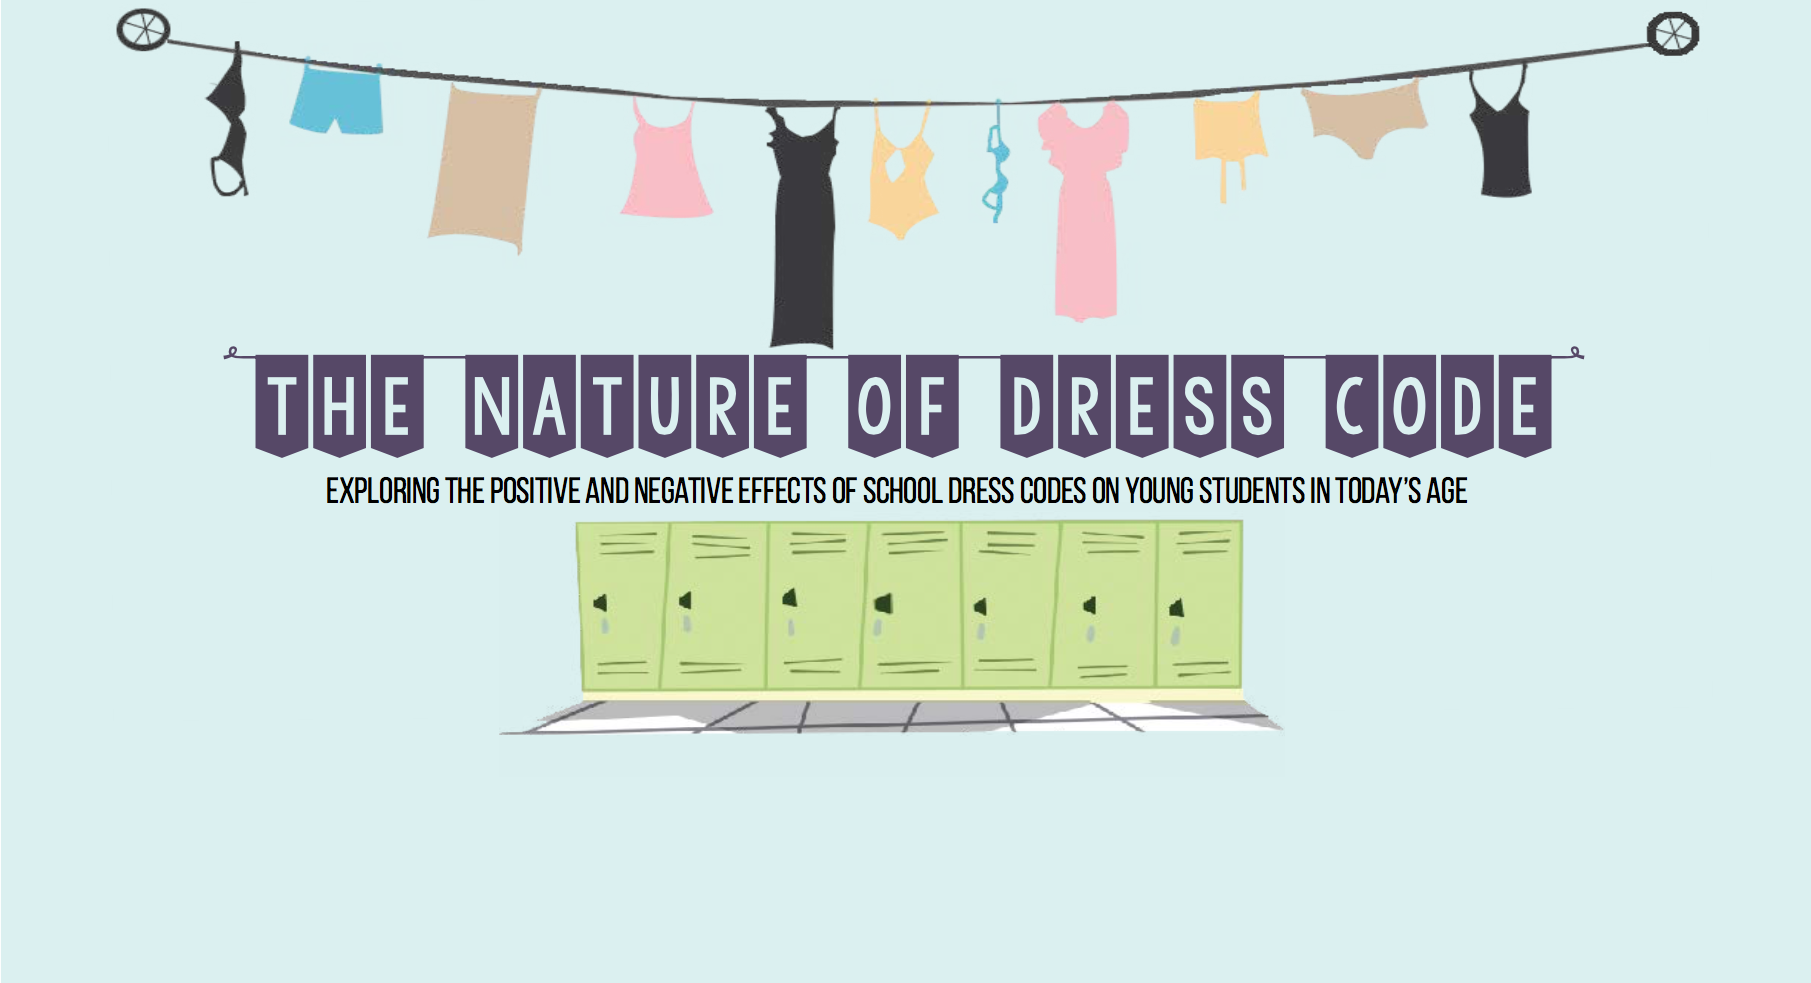 The nature of the dress code